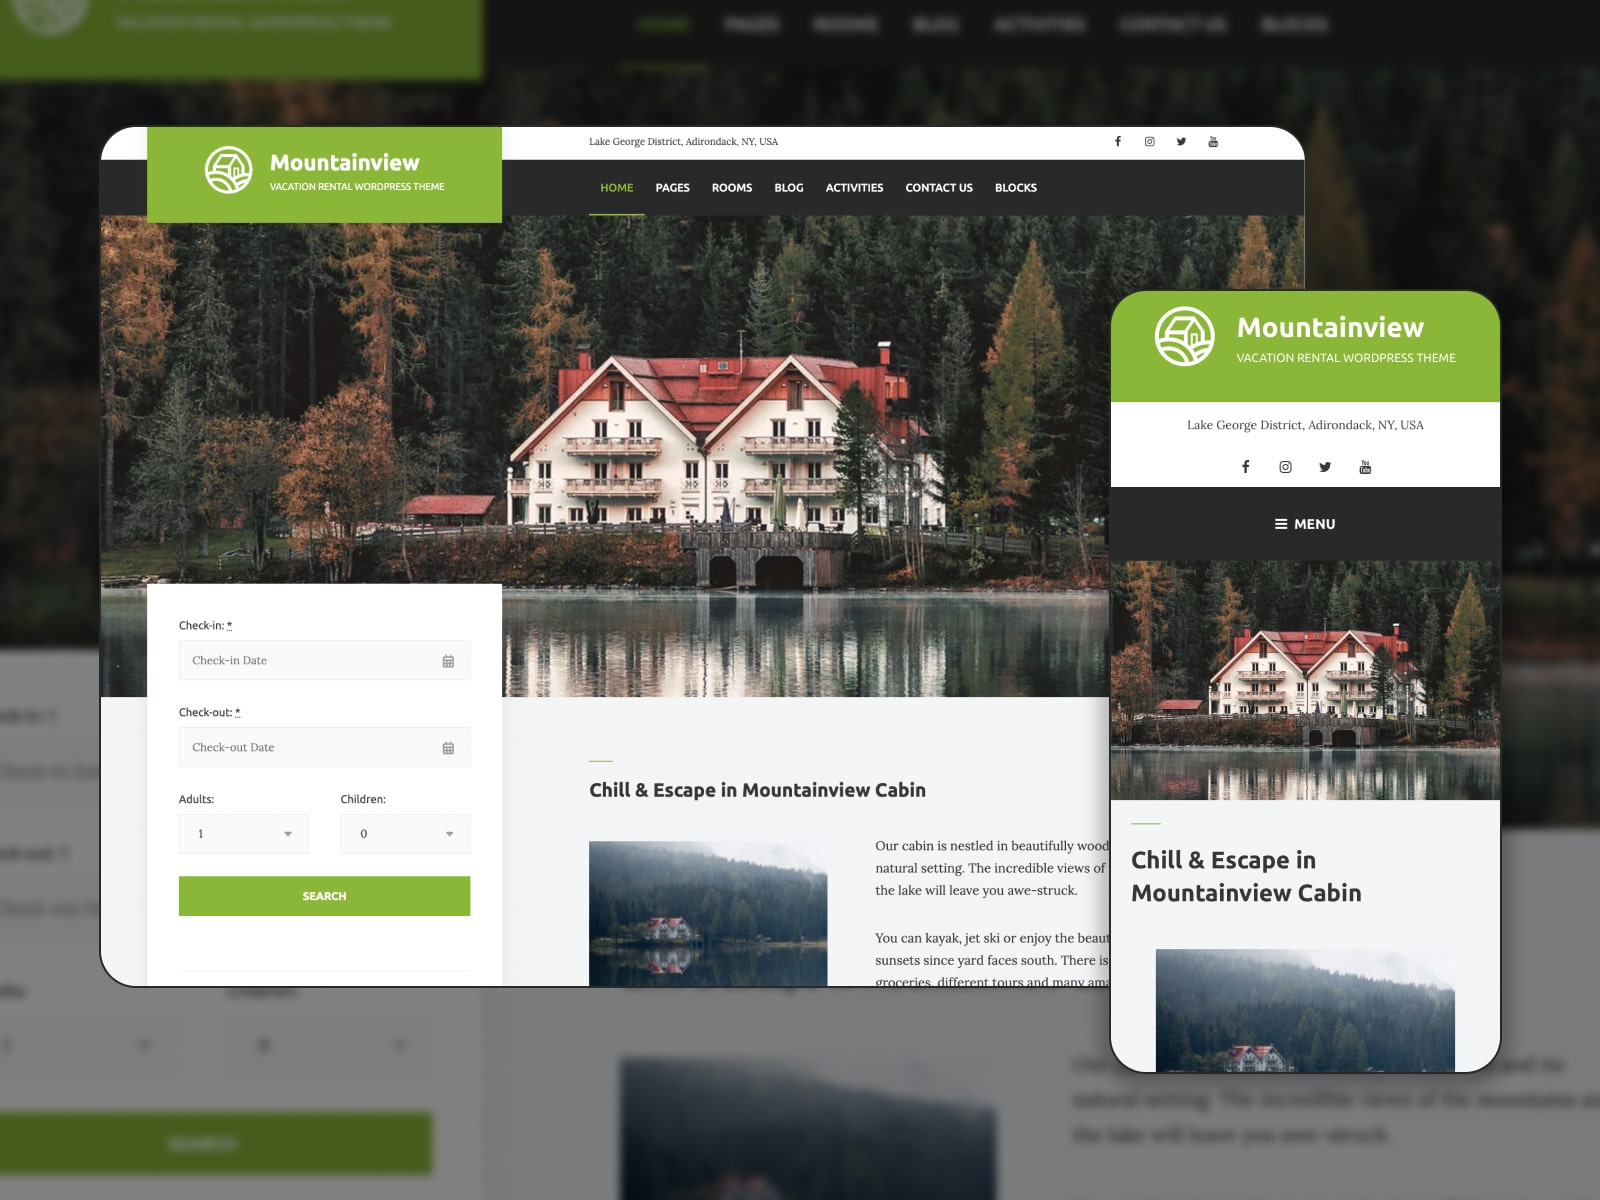 Mountainview Vacation Rental Website Template.